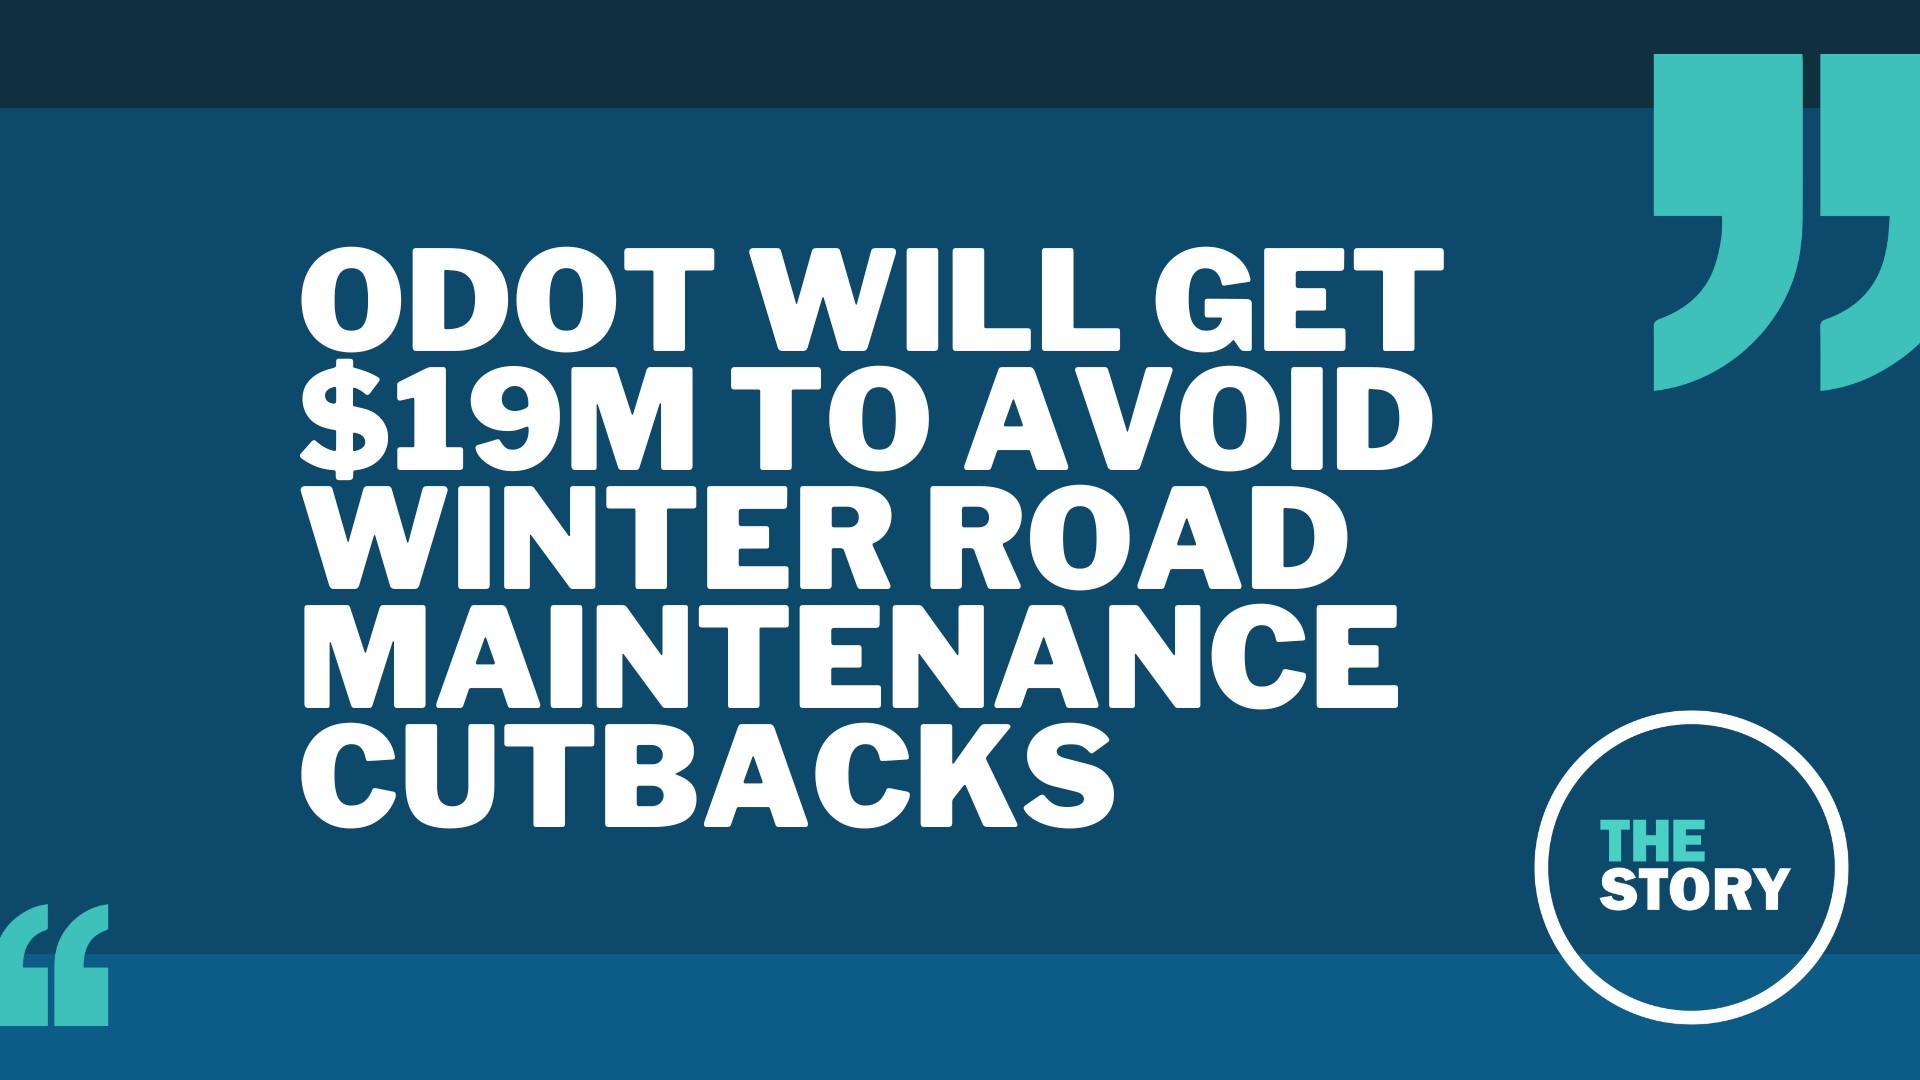 The Oregon Department of Transportation warned in October that it would have to scale back sanding, plowing and other winter road work due to declining revenues.